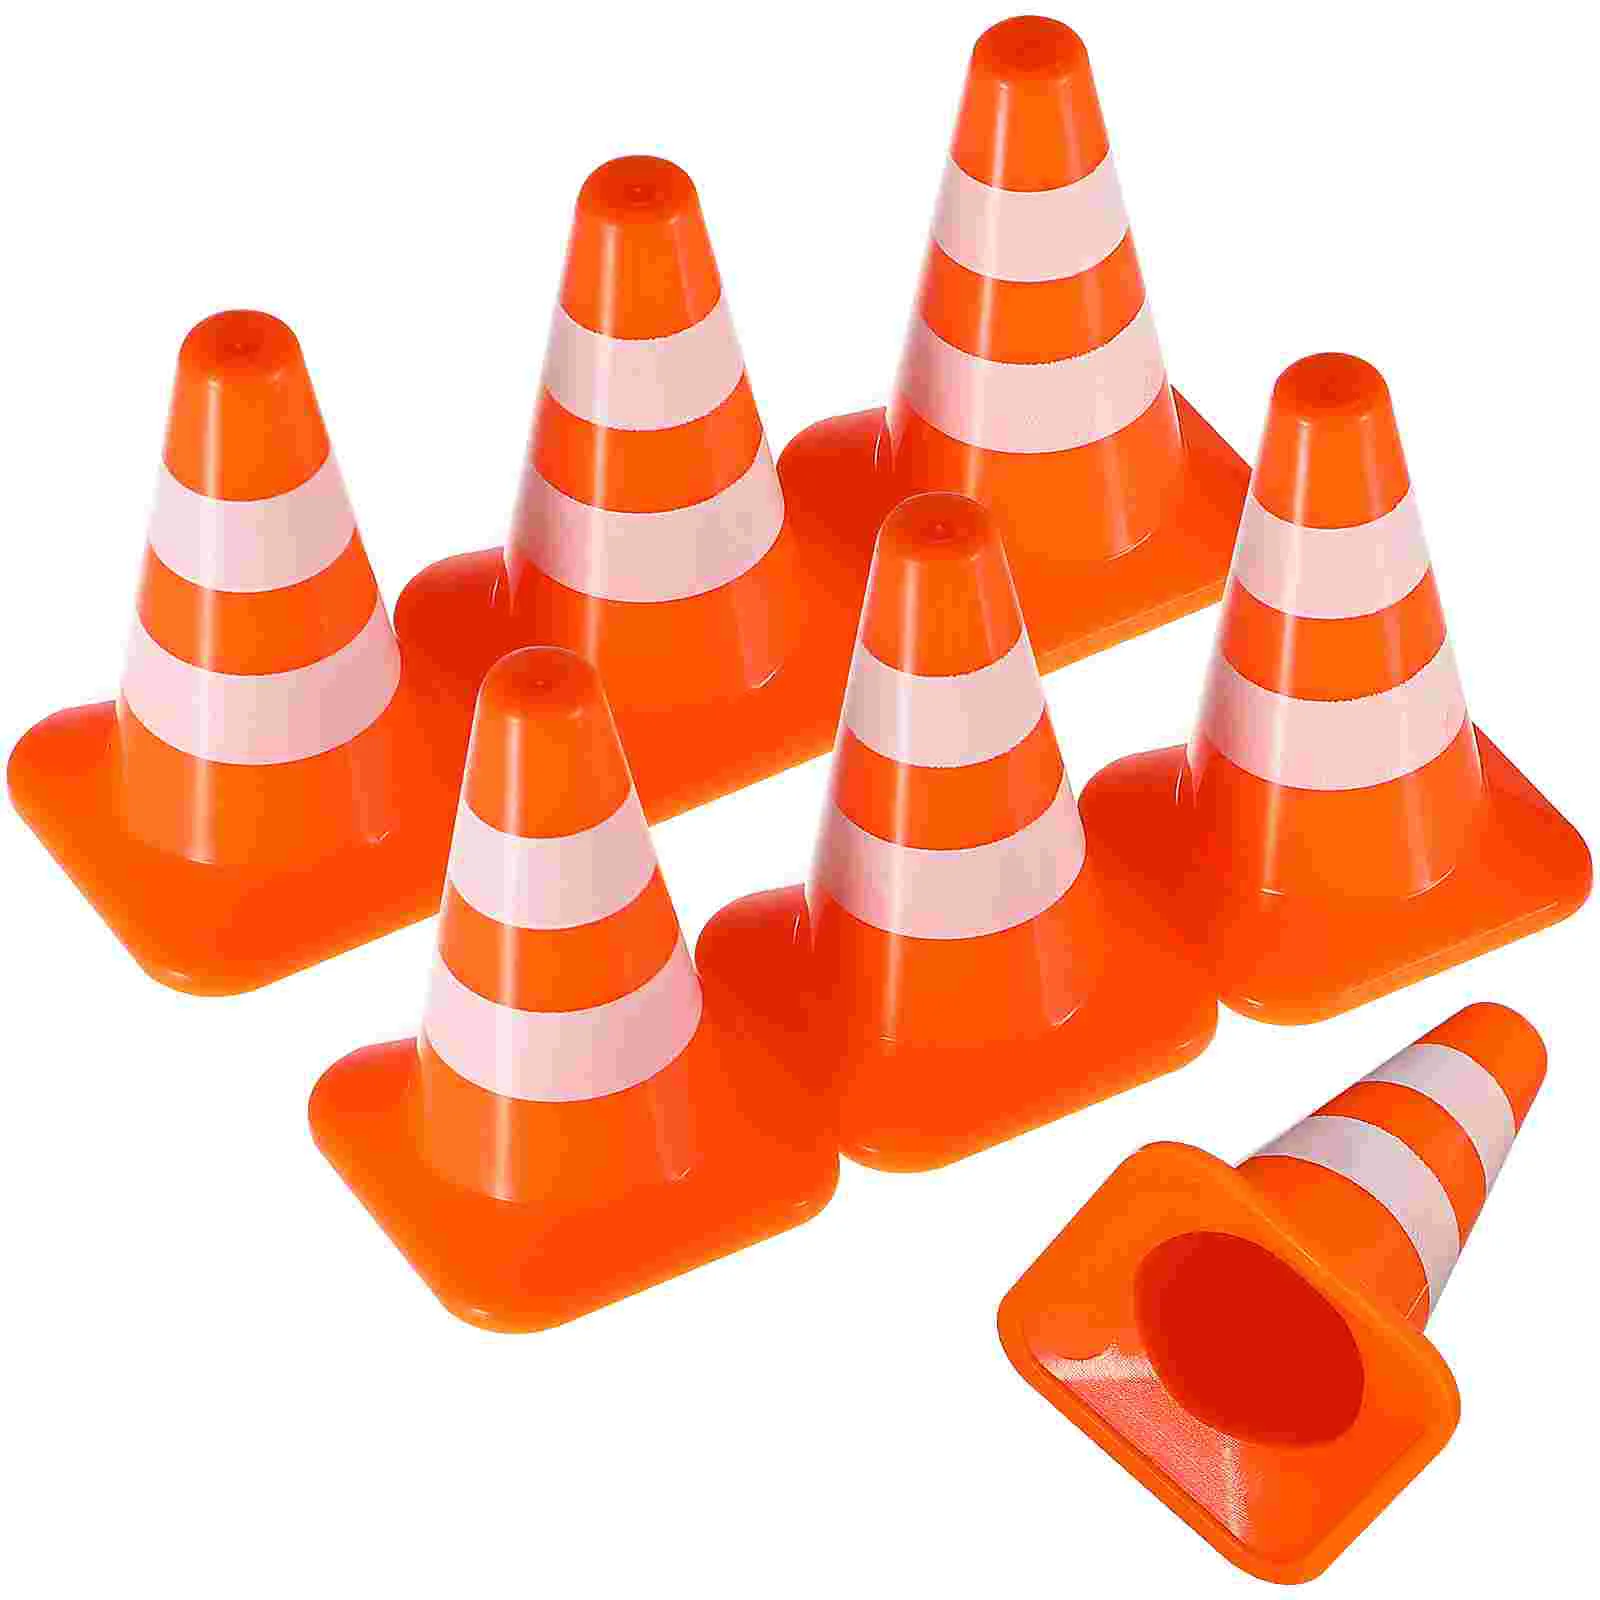 

7 Pcs Roadblock Sand Table Model Traffic Models Educational Learning Toys Cones Mini Kids Plastic Signs Abs Child